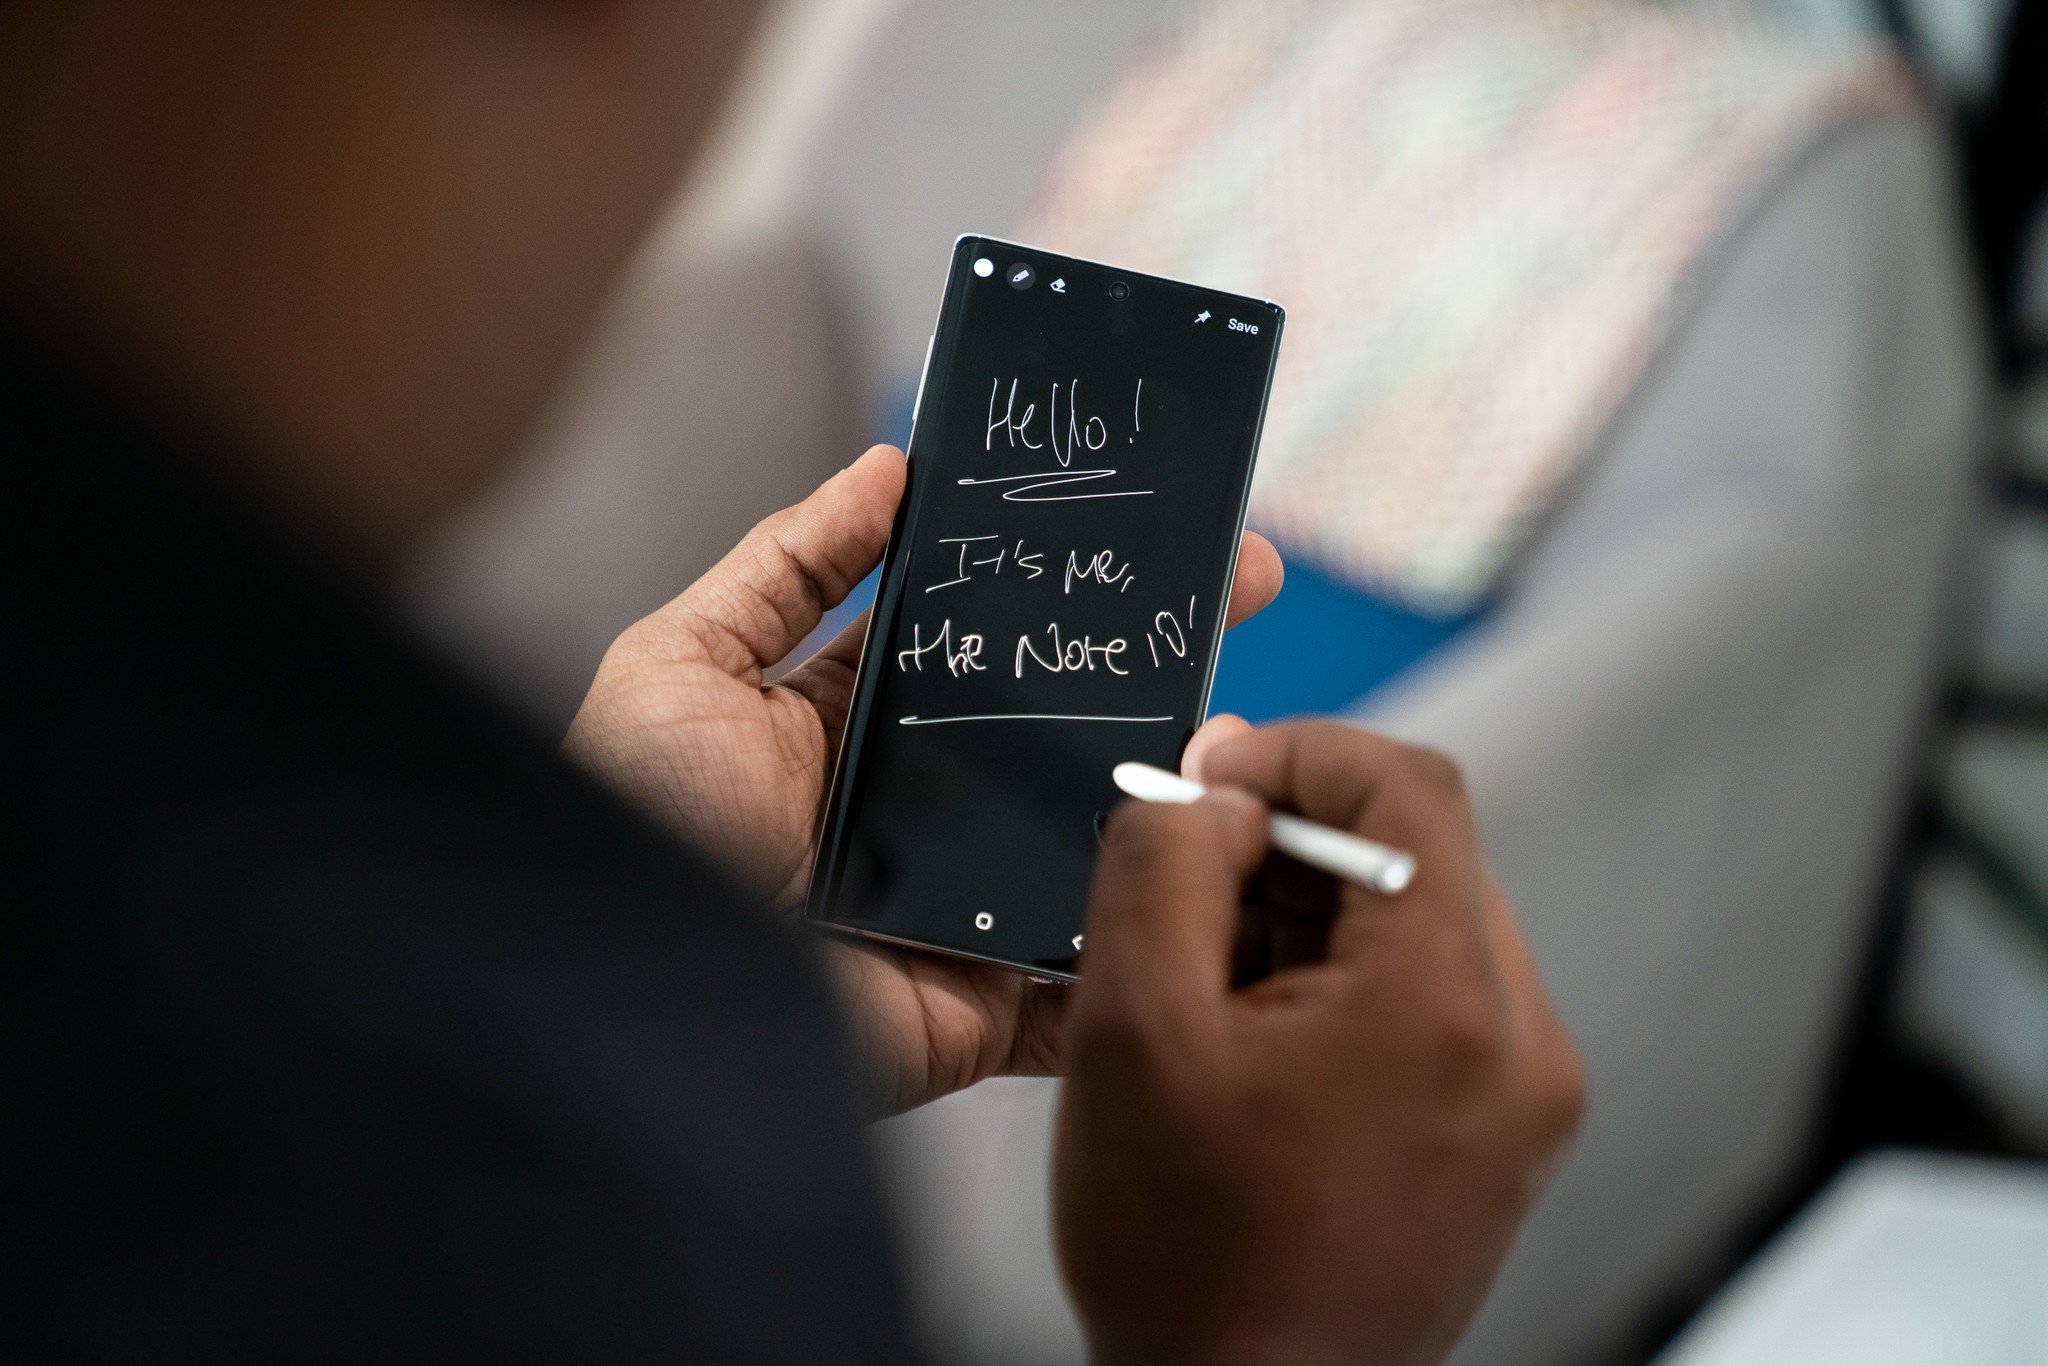 Things You Might Not Know You Can Do with Your Galaxy Note10 and